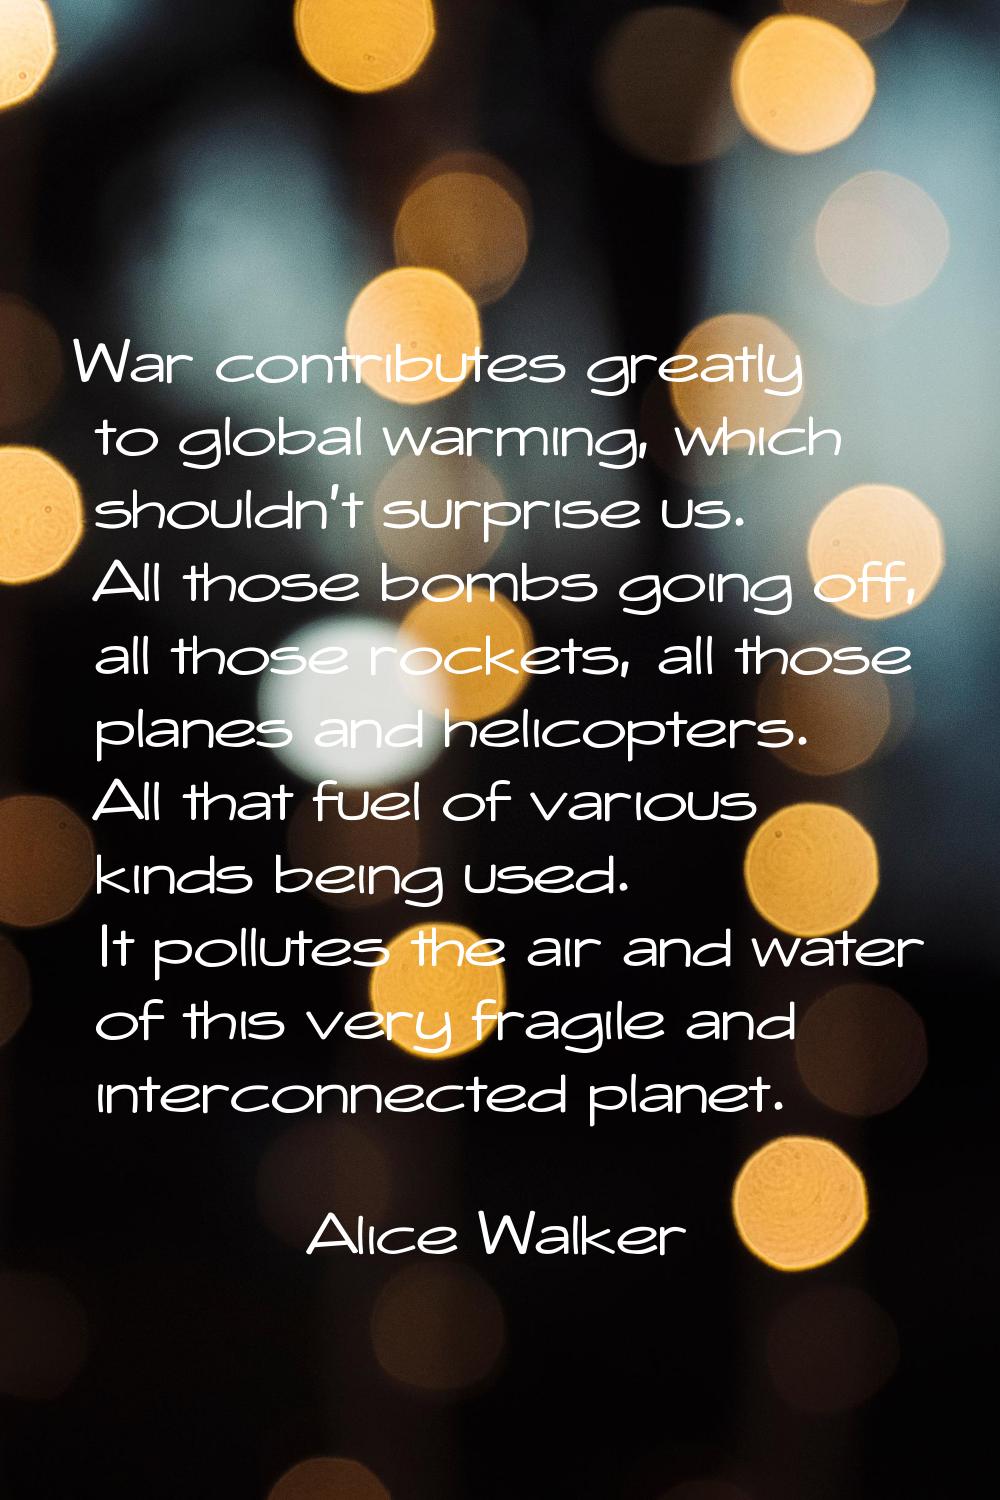 War contributes greatly to global warming, which shouldn't surprise us. All those bombs going off, 